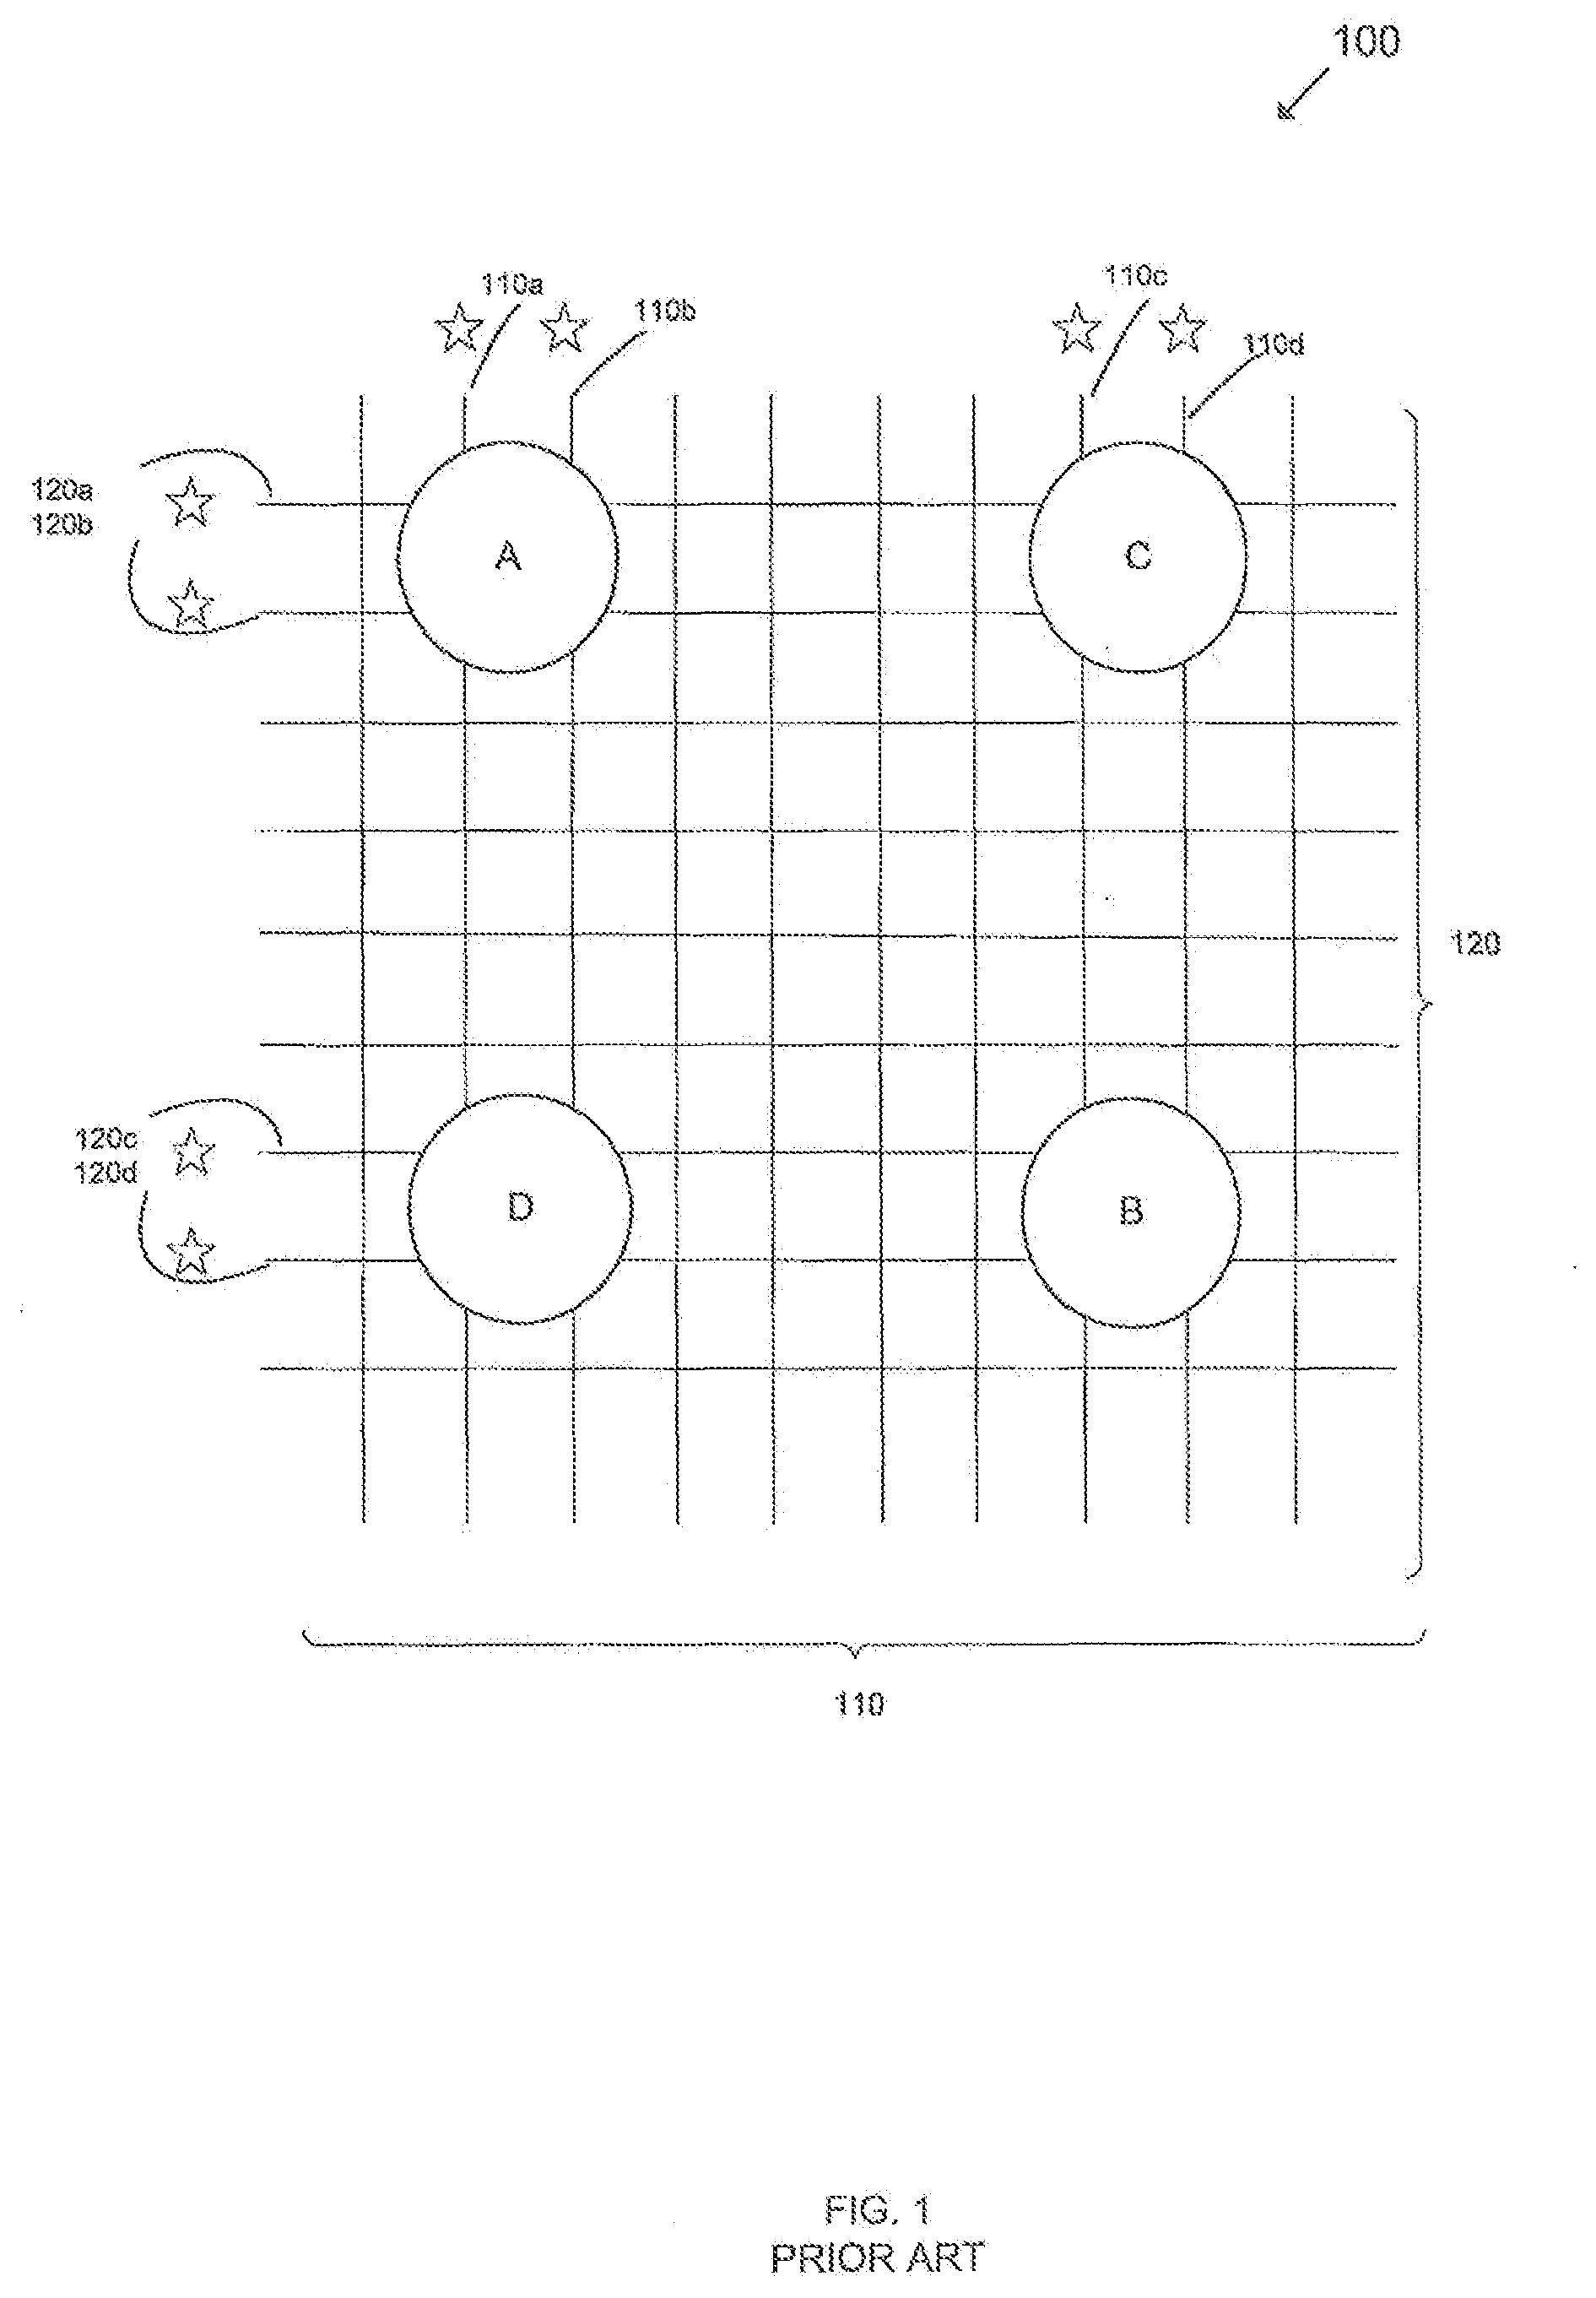 Systems and methods for determining the location and pressure of a touchload applied to a touchpad